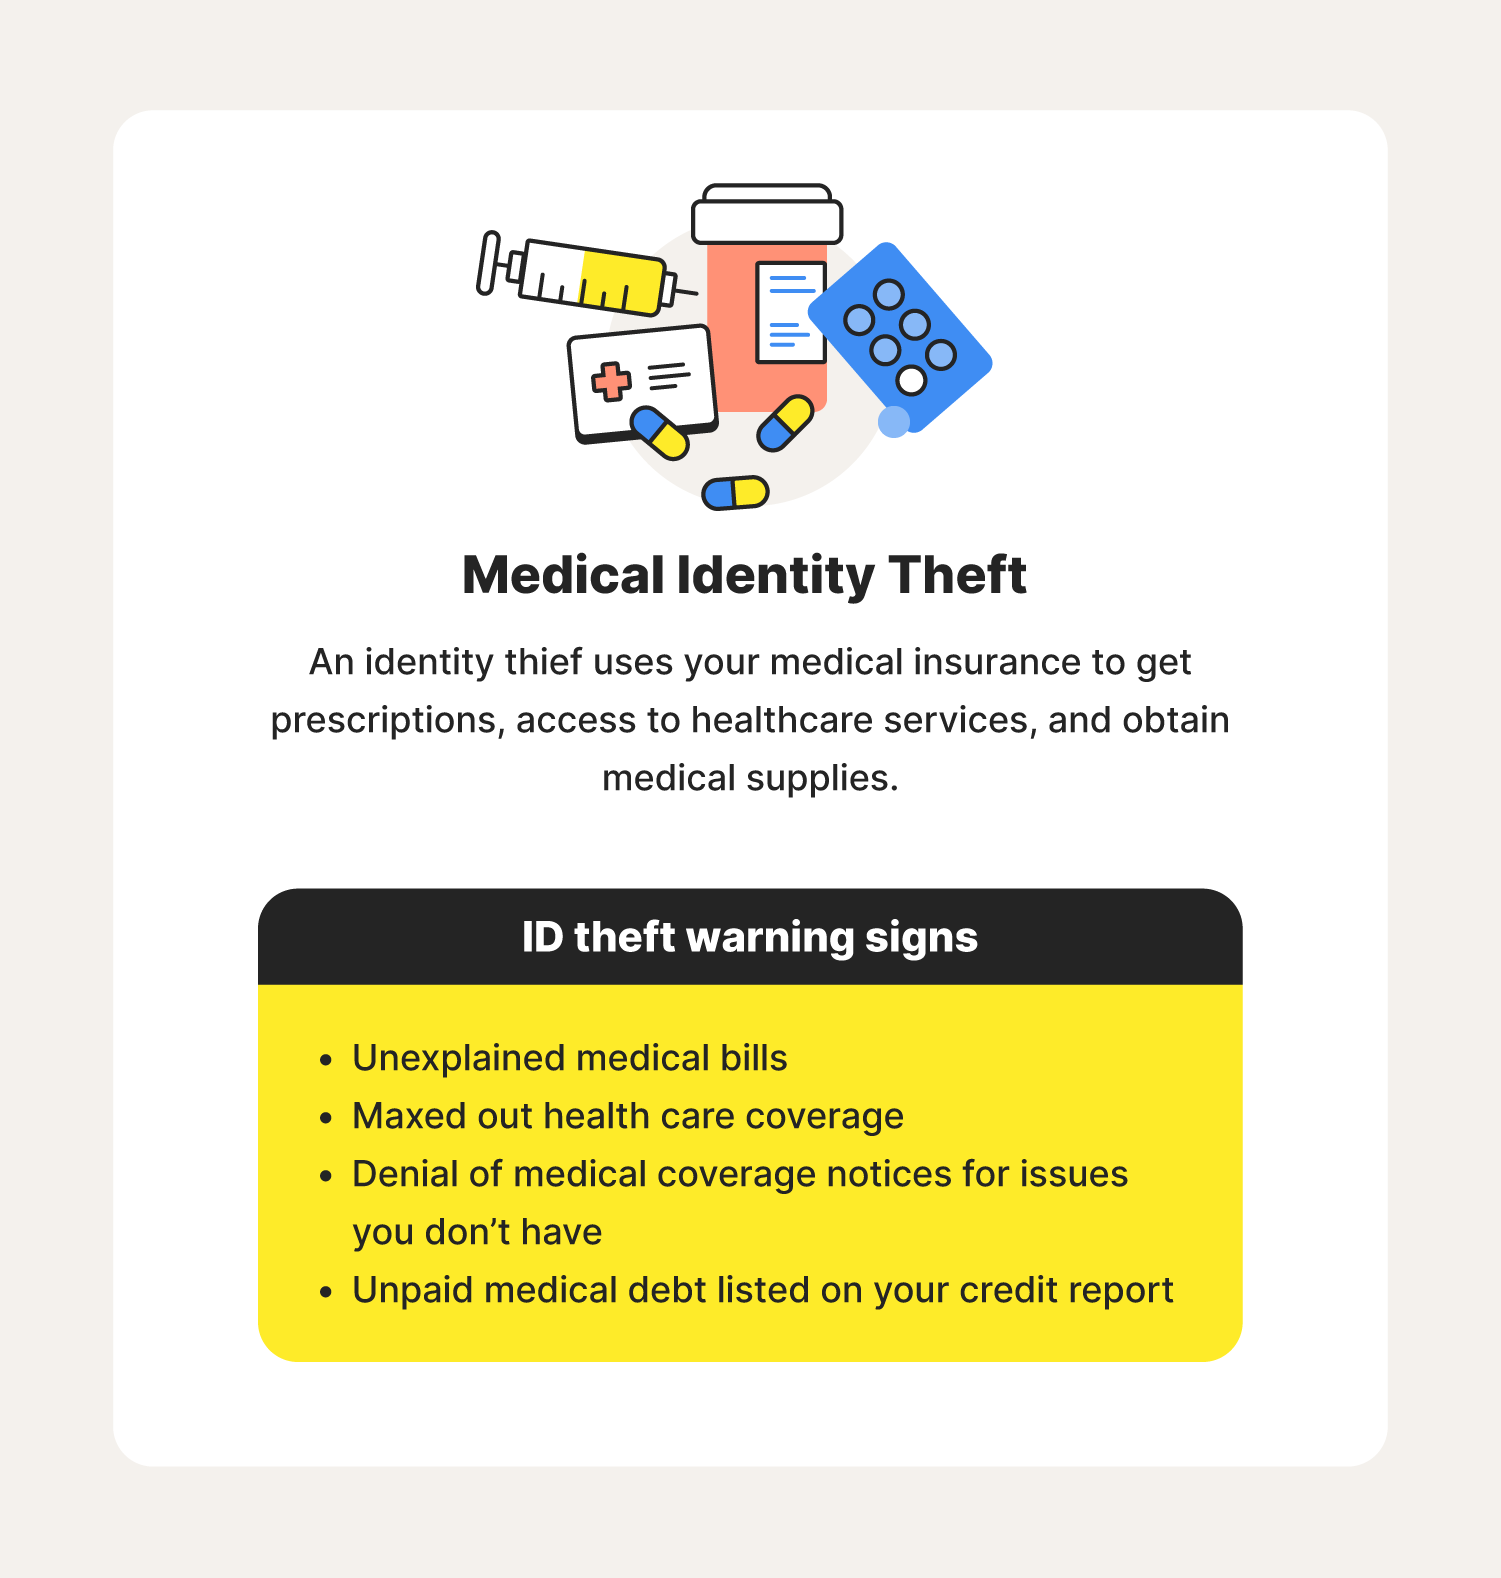 An illustration and definition of medical identity theft accompanies ID theft warning signs to help you know how to prevent identity theft  